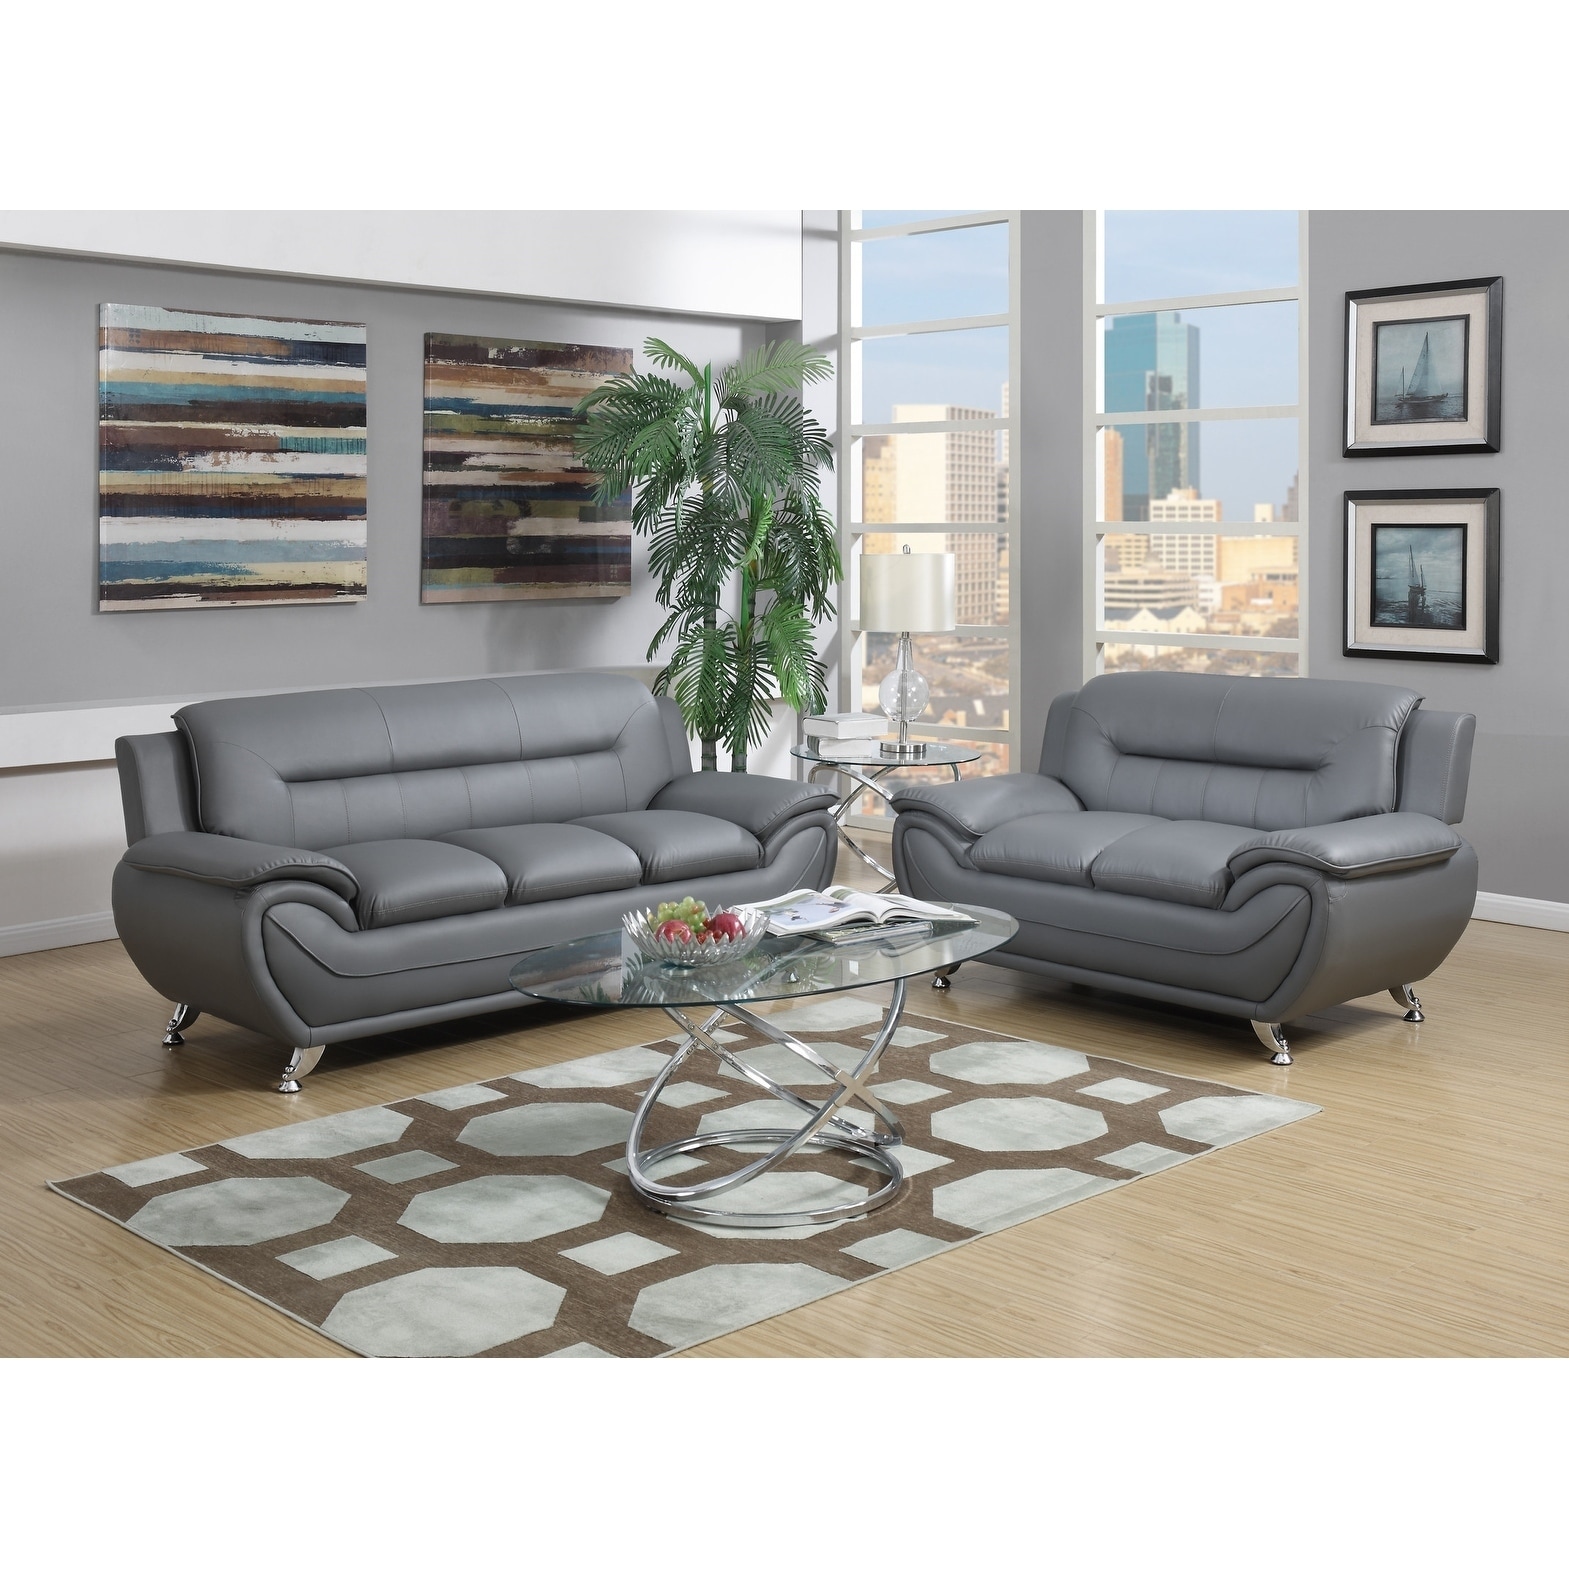 Shop Gtu Furniture Contemporary Modern Sleek Chic And Plush And